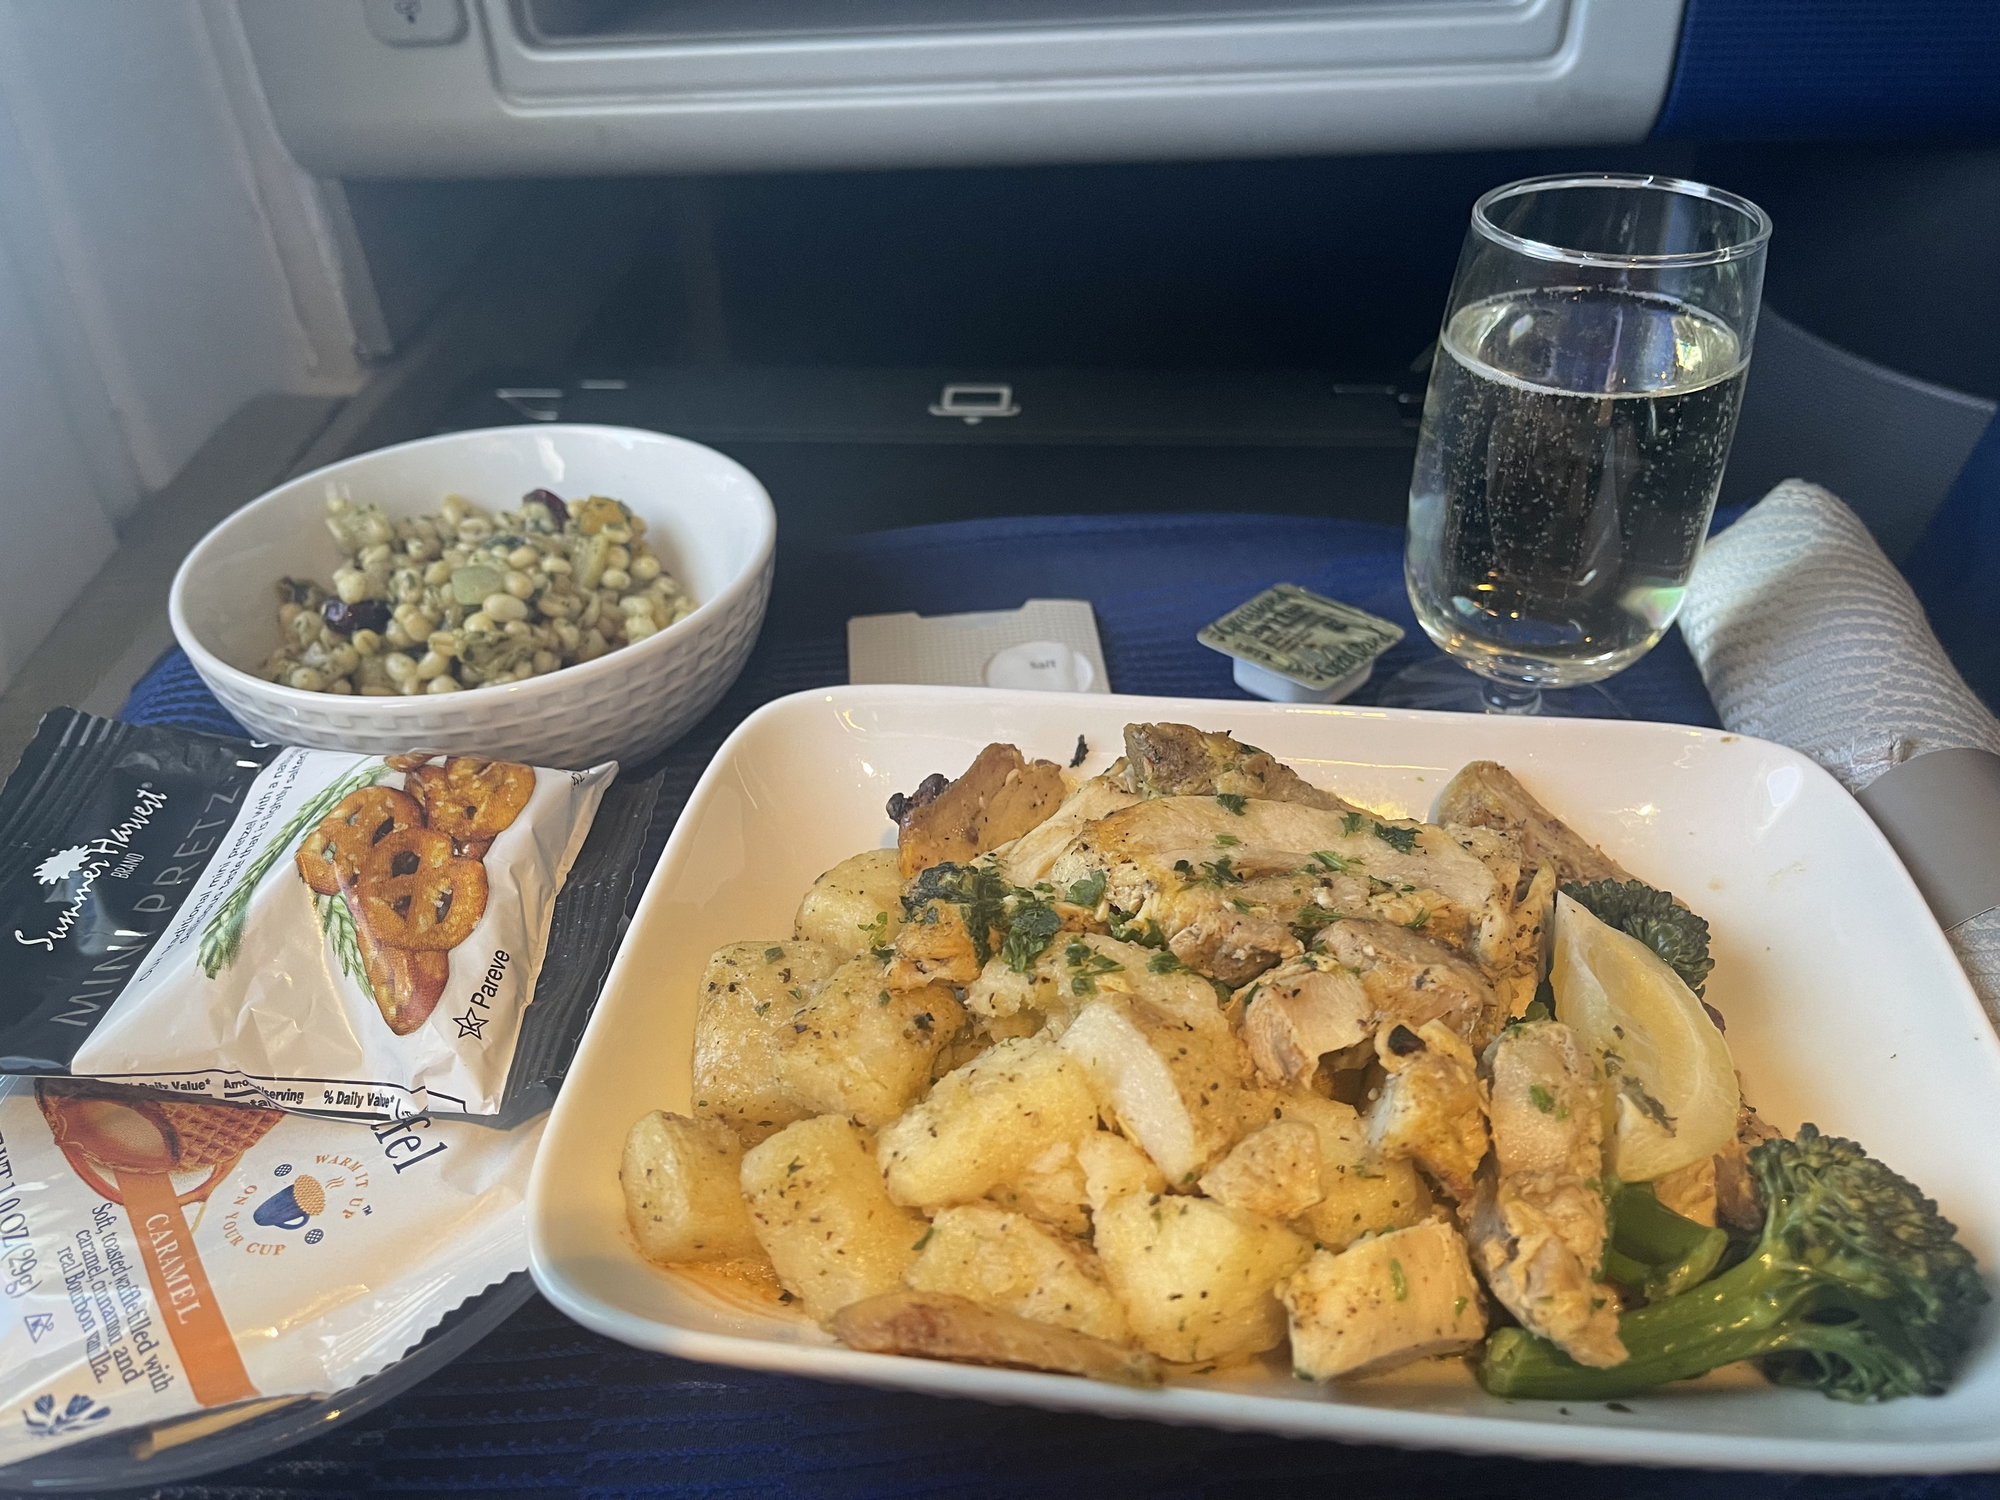 Southwest Chicken Salad Shaker On United Airlines - Live and Let's Fly